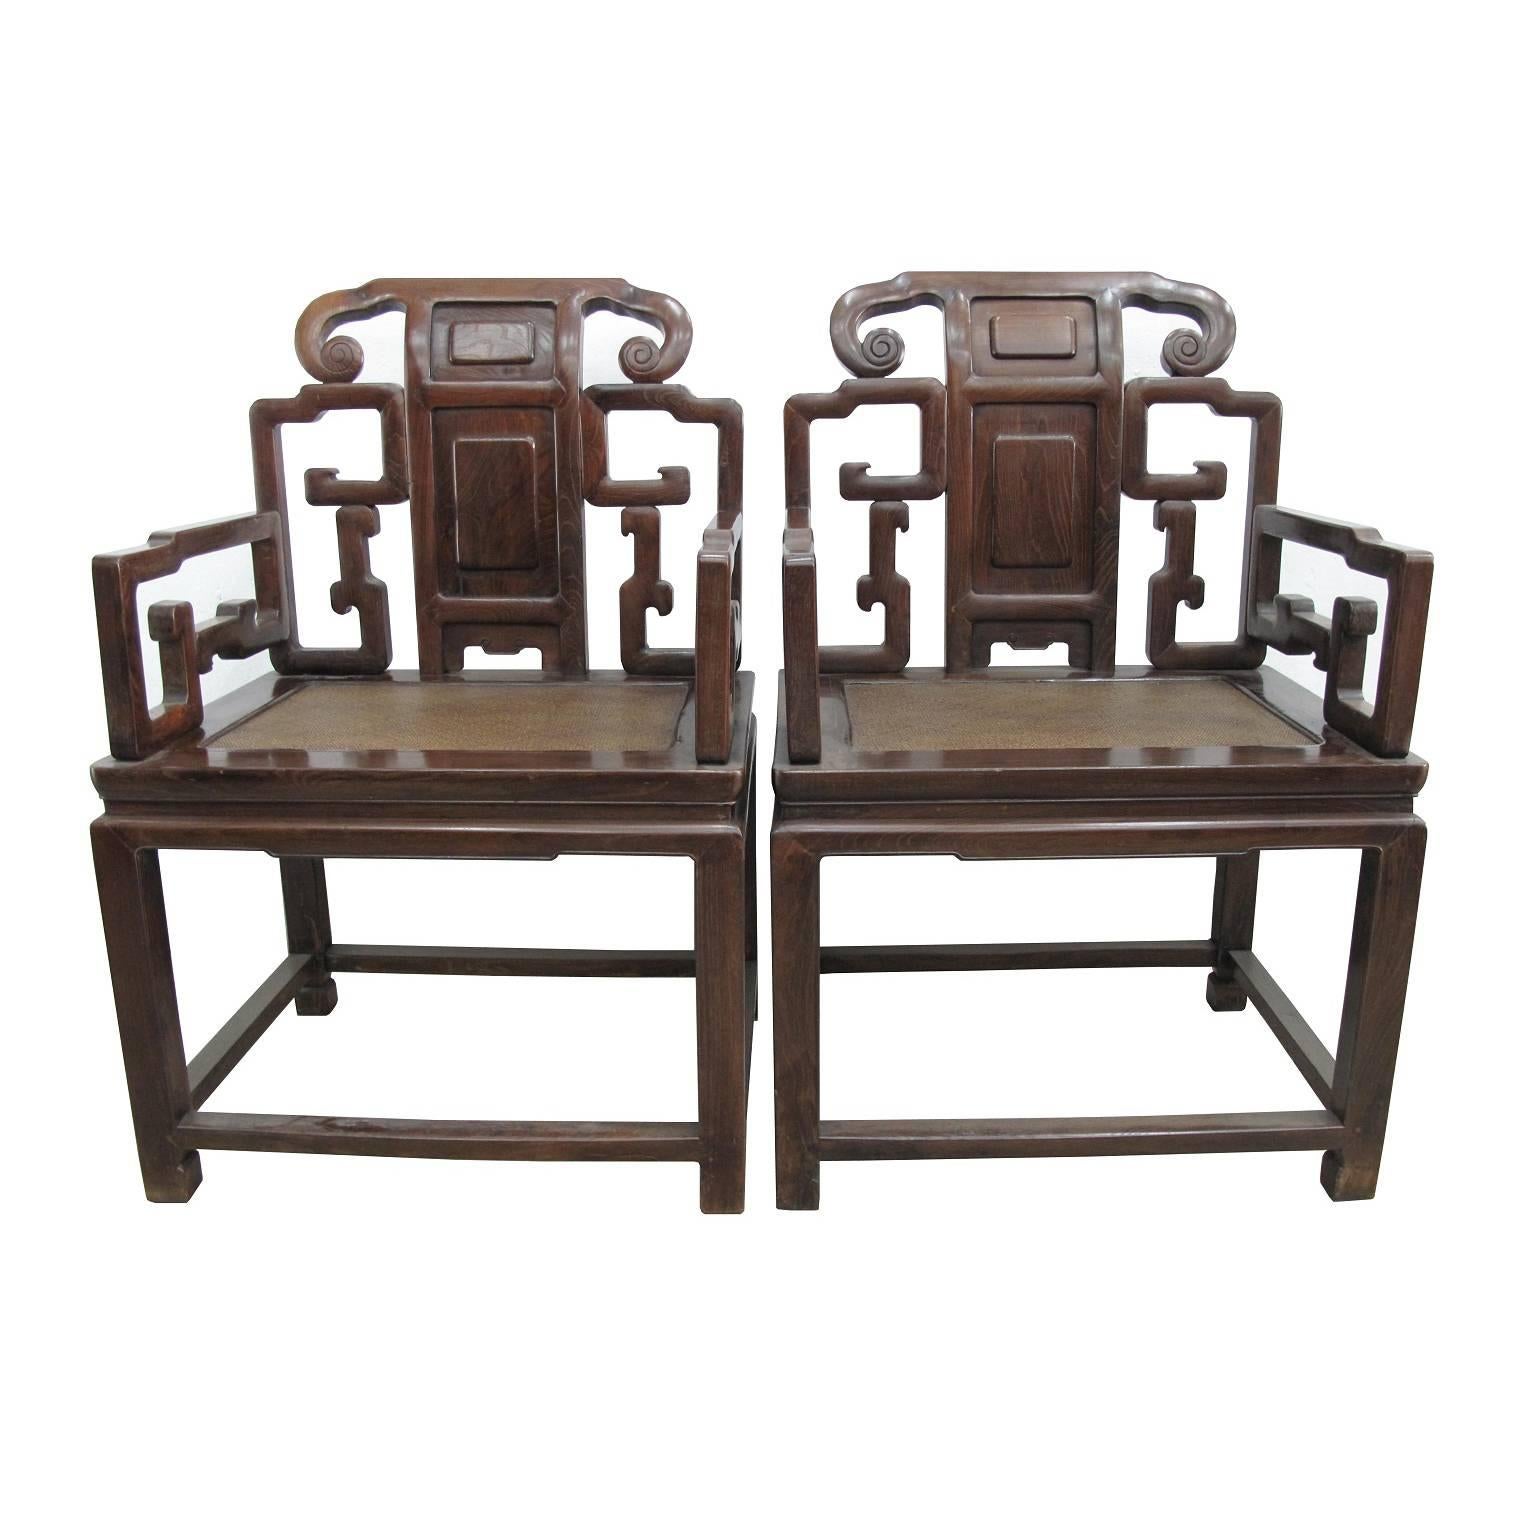 Pair of Early 19th Century Chinese Low-Back Armchairs in Rare Zhazhen Wood For Sale